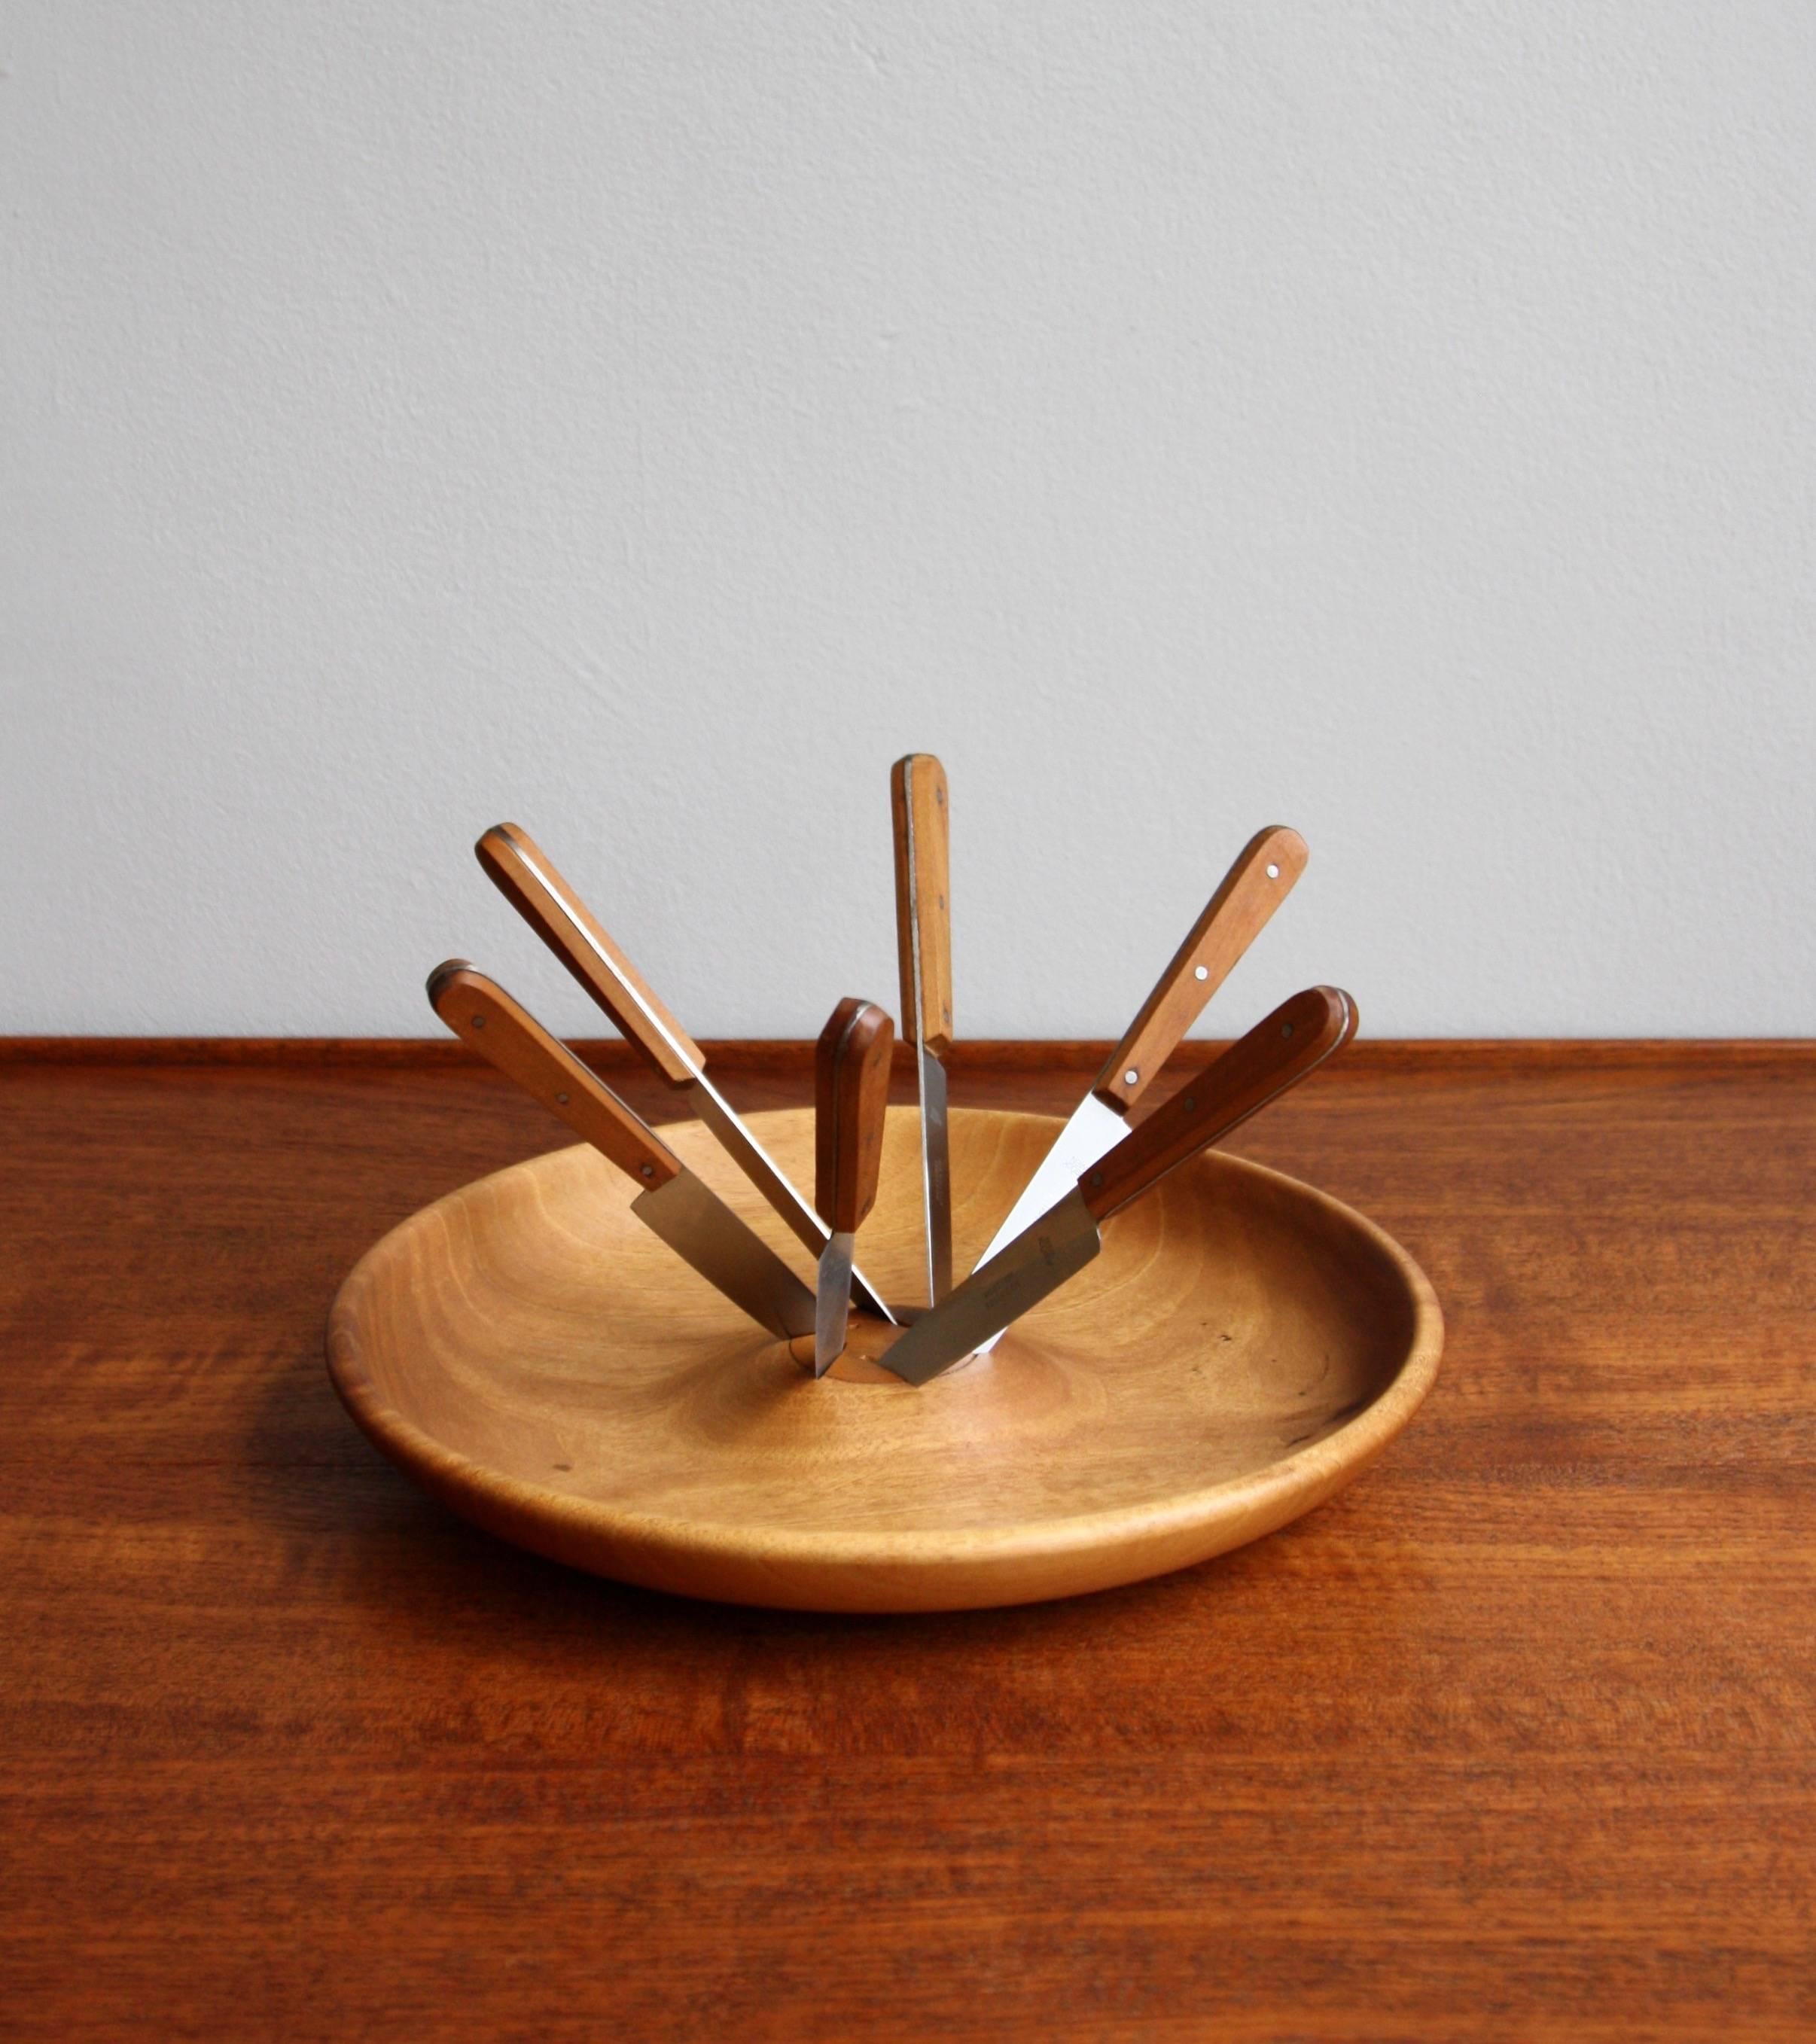 A rare obstmesser/fruit knife set designed and made by Carl Auböck II, circa 1950.
The beautifully grained bowl is carved from a solid piece of walnut wood. A set of six stainless steel knifes with walnut clad handles slot into and spiral outwards